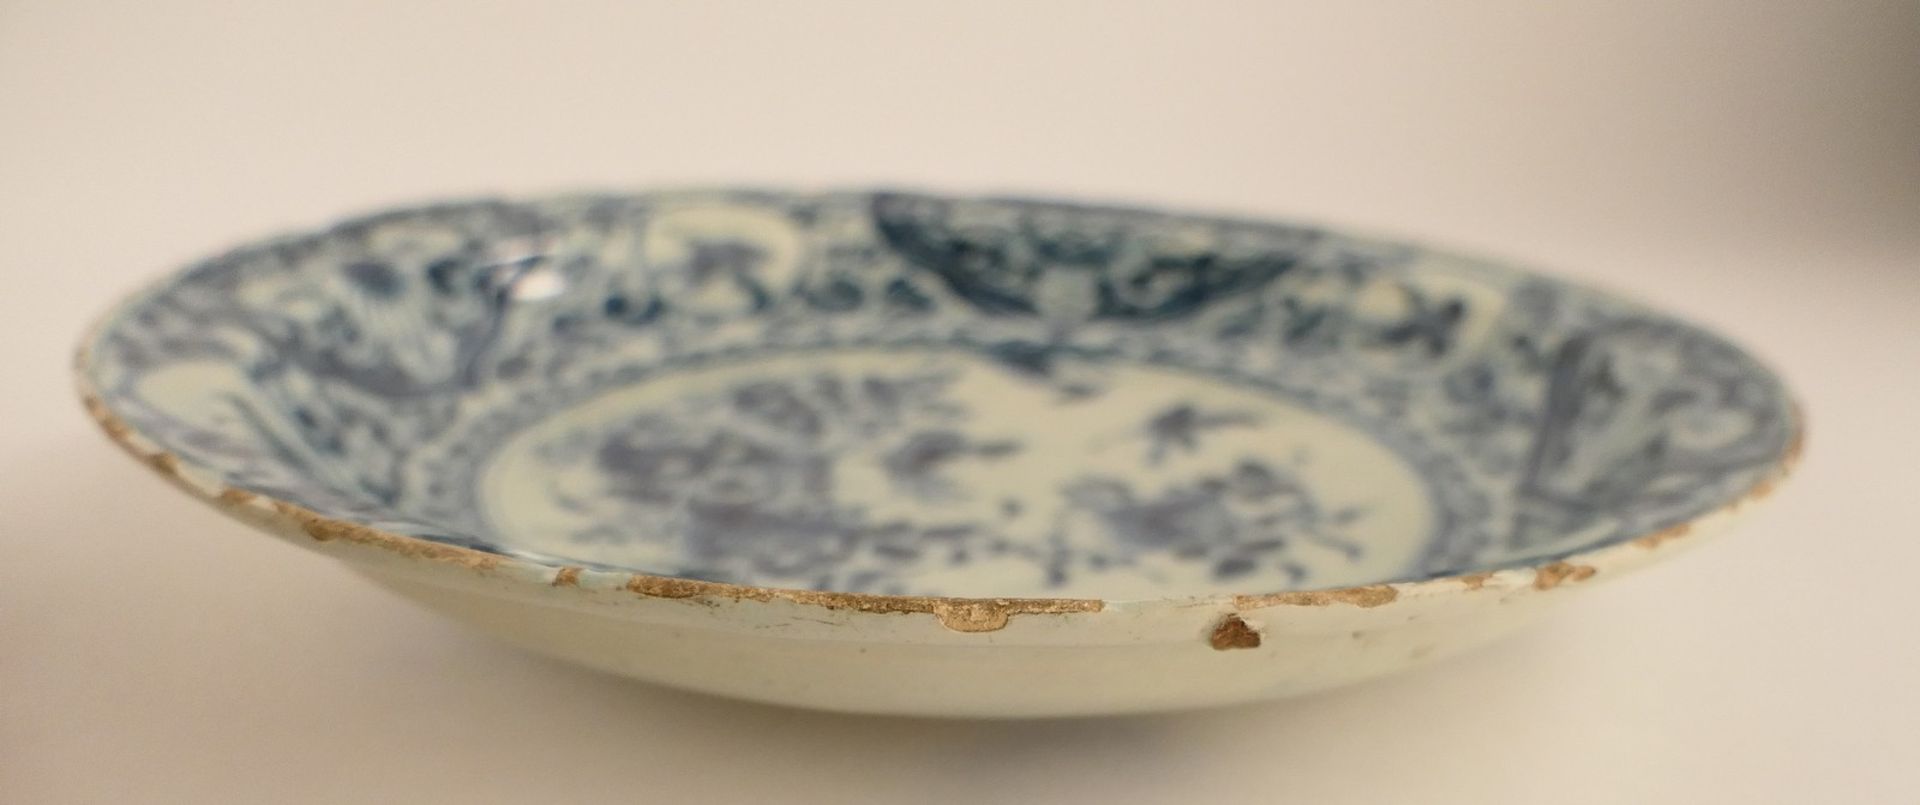 A blue and white 'theeboom' decorated Dutch Delftware plate, marked 'De Witte Starre', Diameter 28 - Image 7 of 9